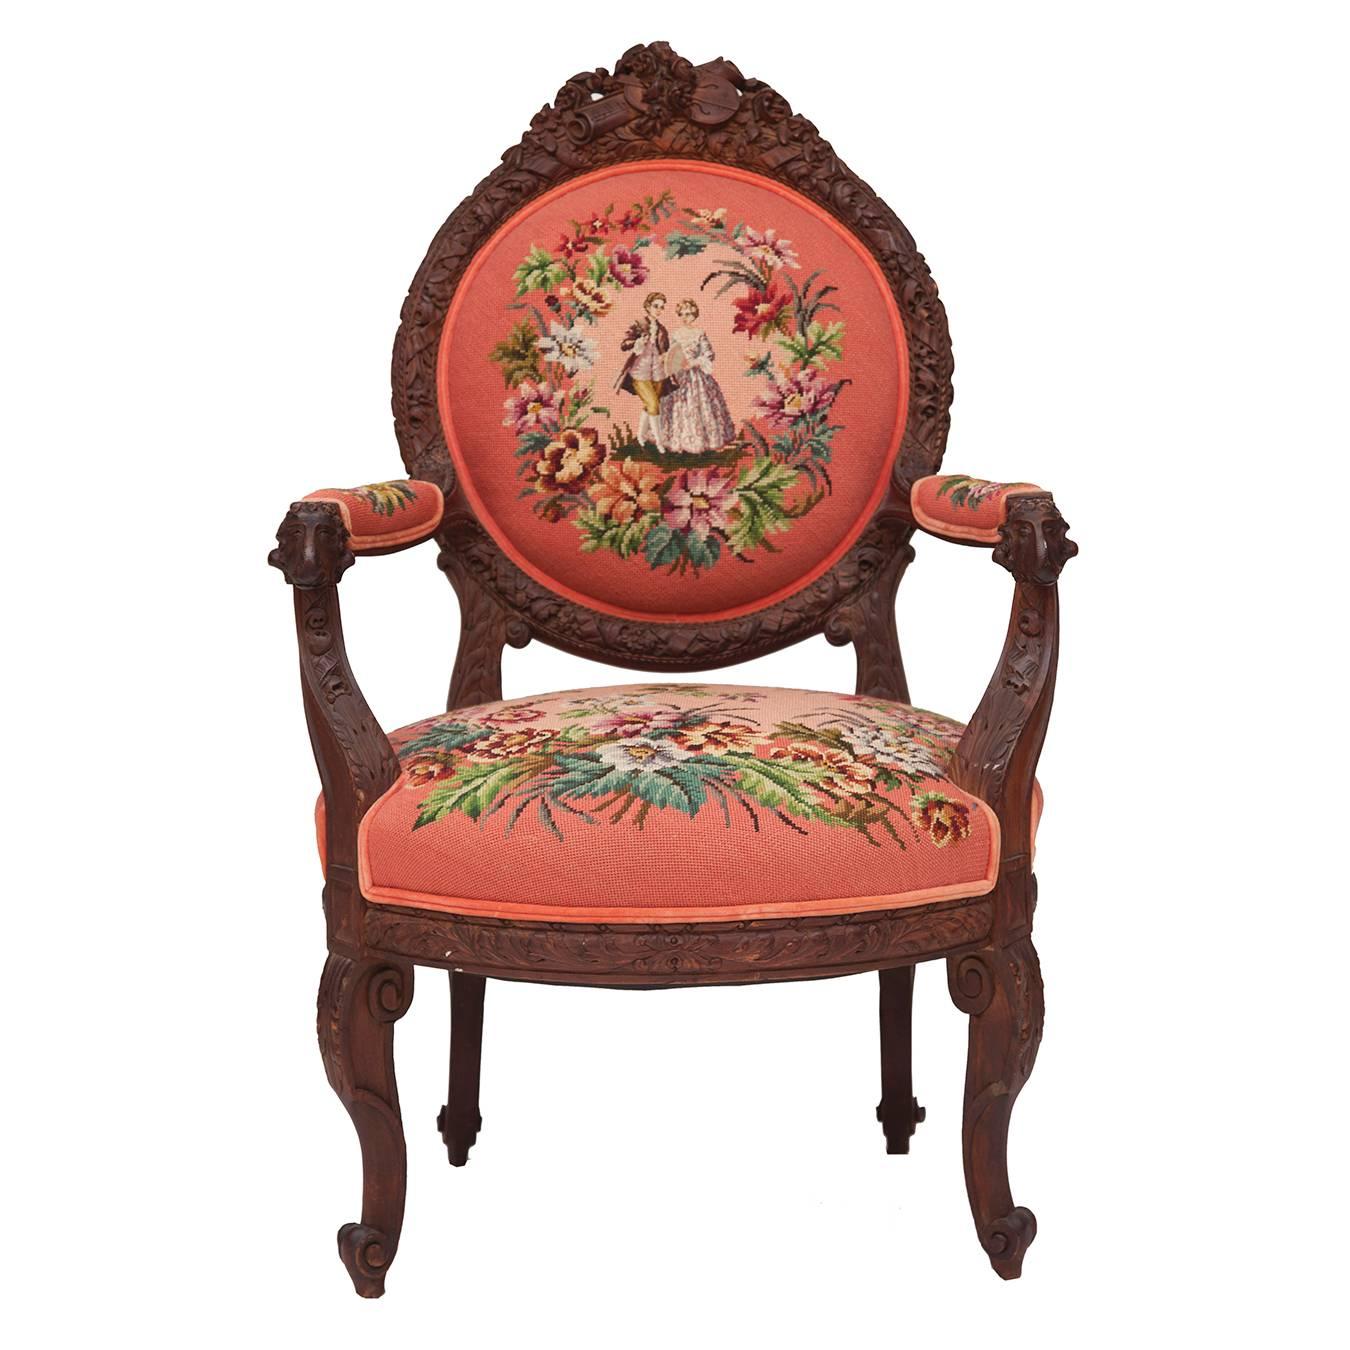 19th Century Hand-Carved French Needlepoint Aubusson Chair with Musical Accents